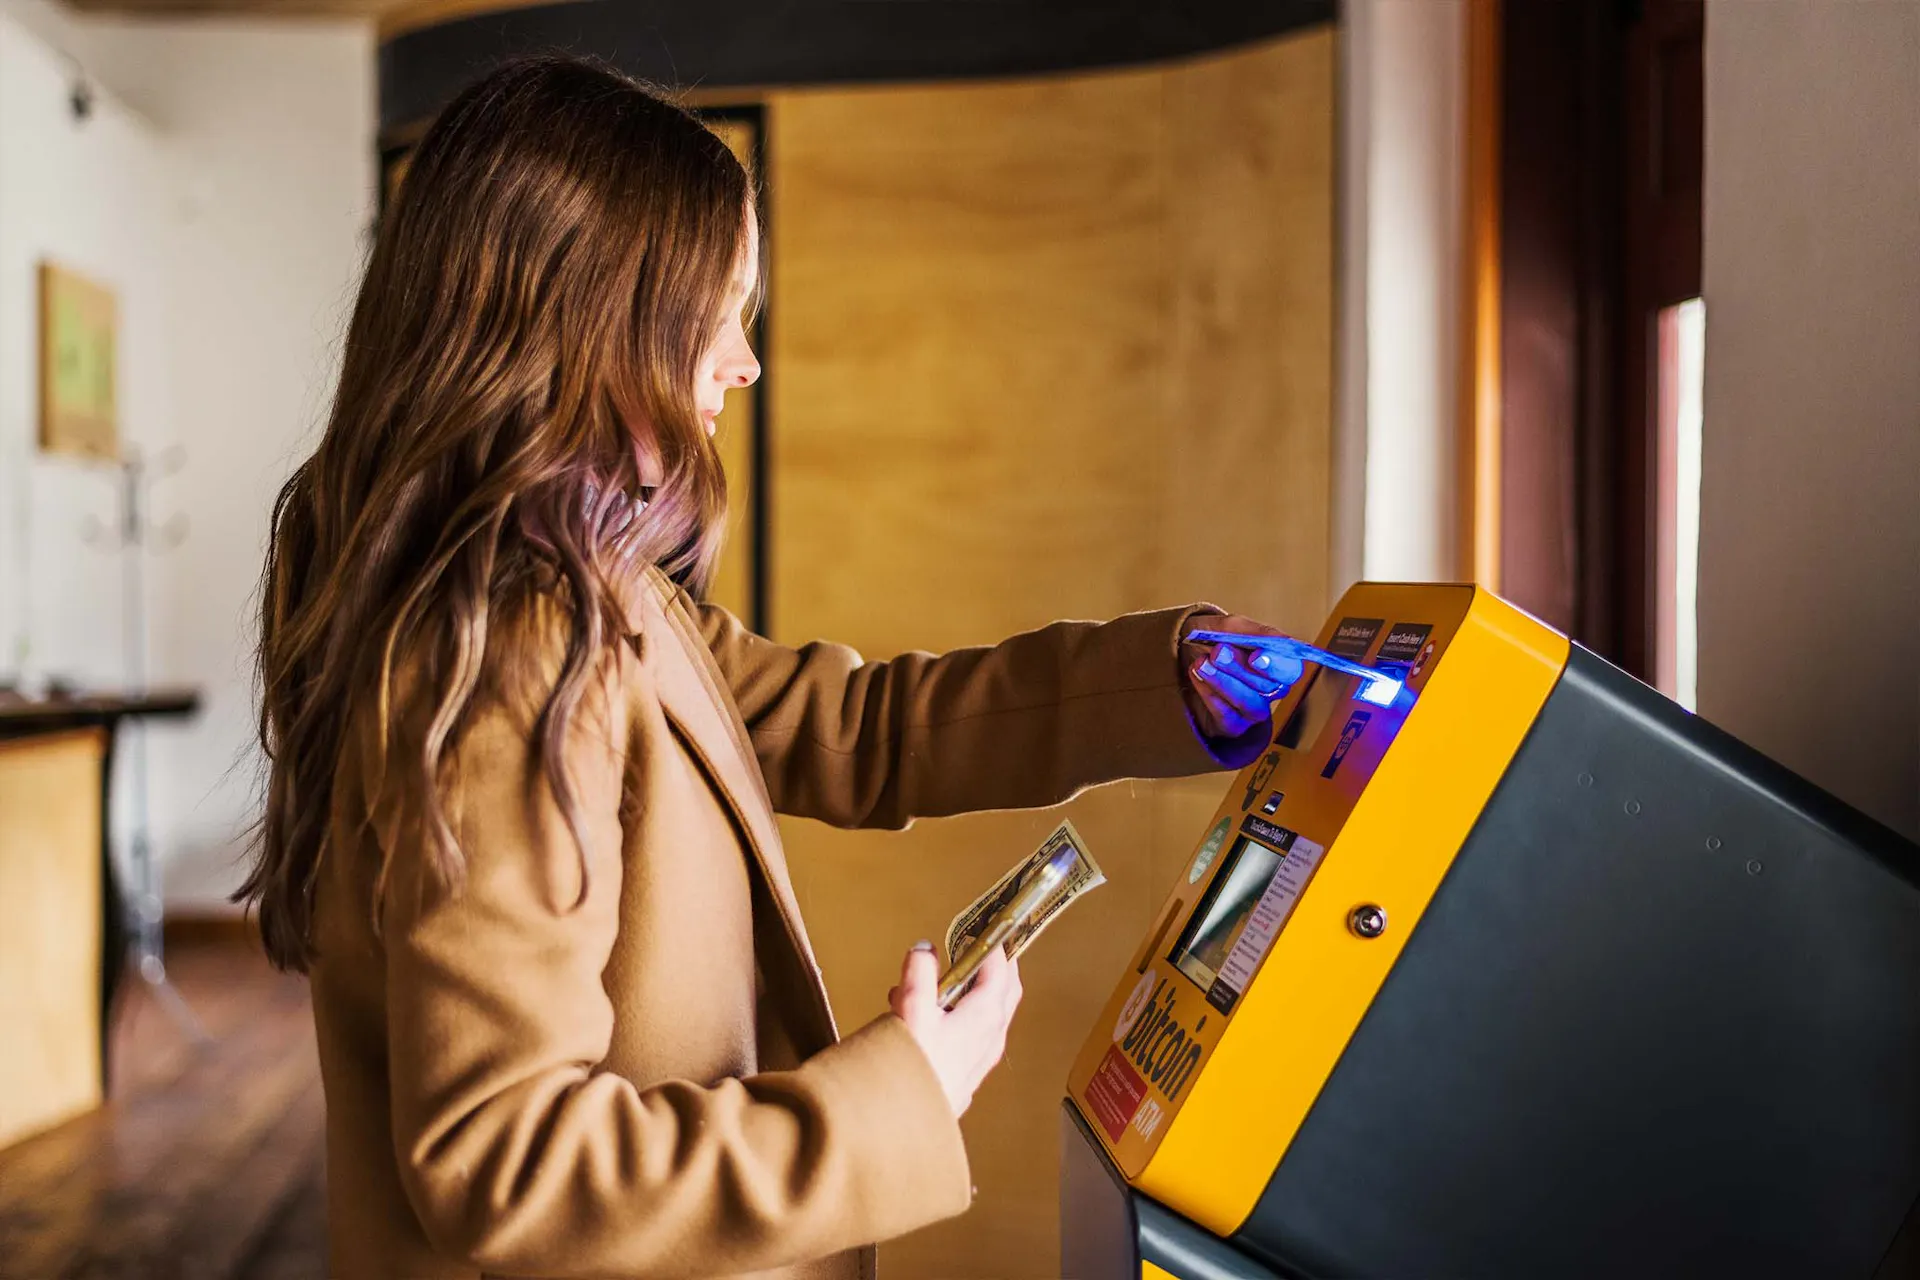 woman scanning phone on bitcoin -central atm machine